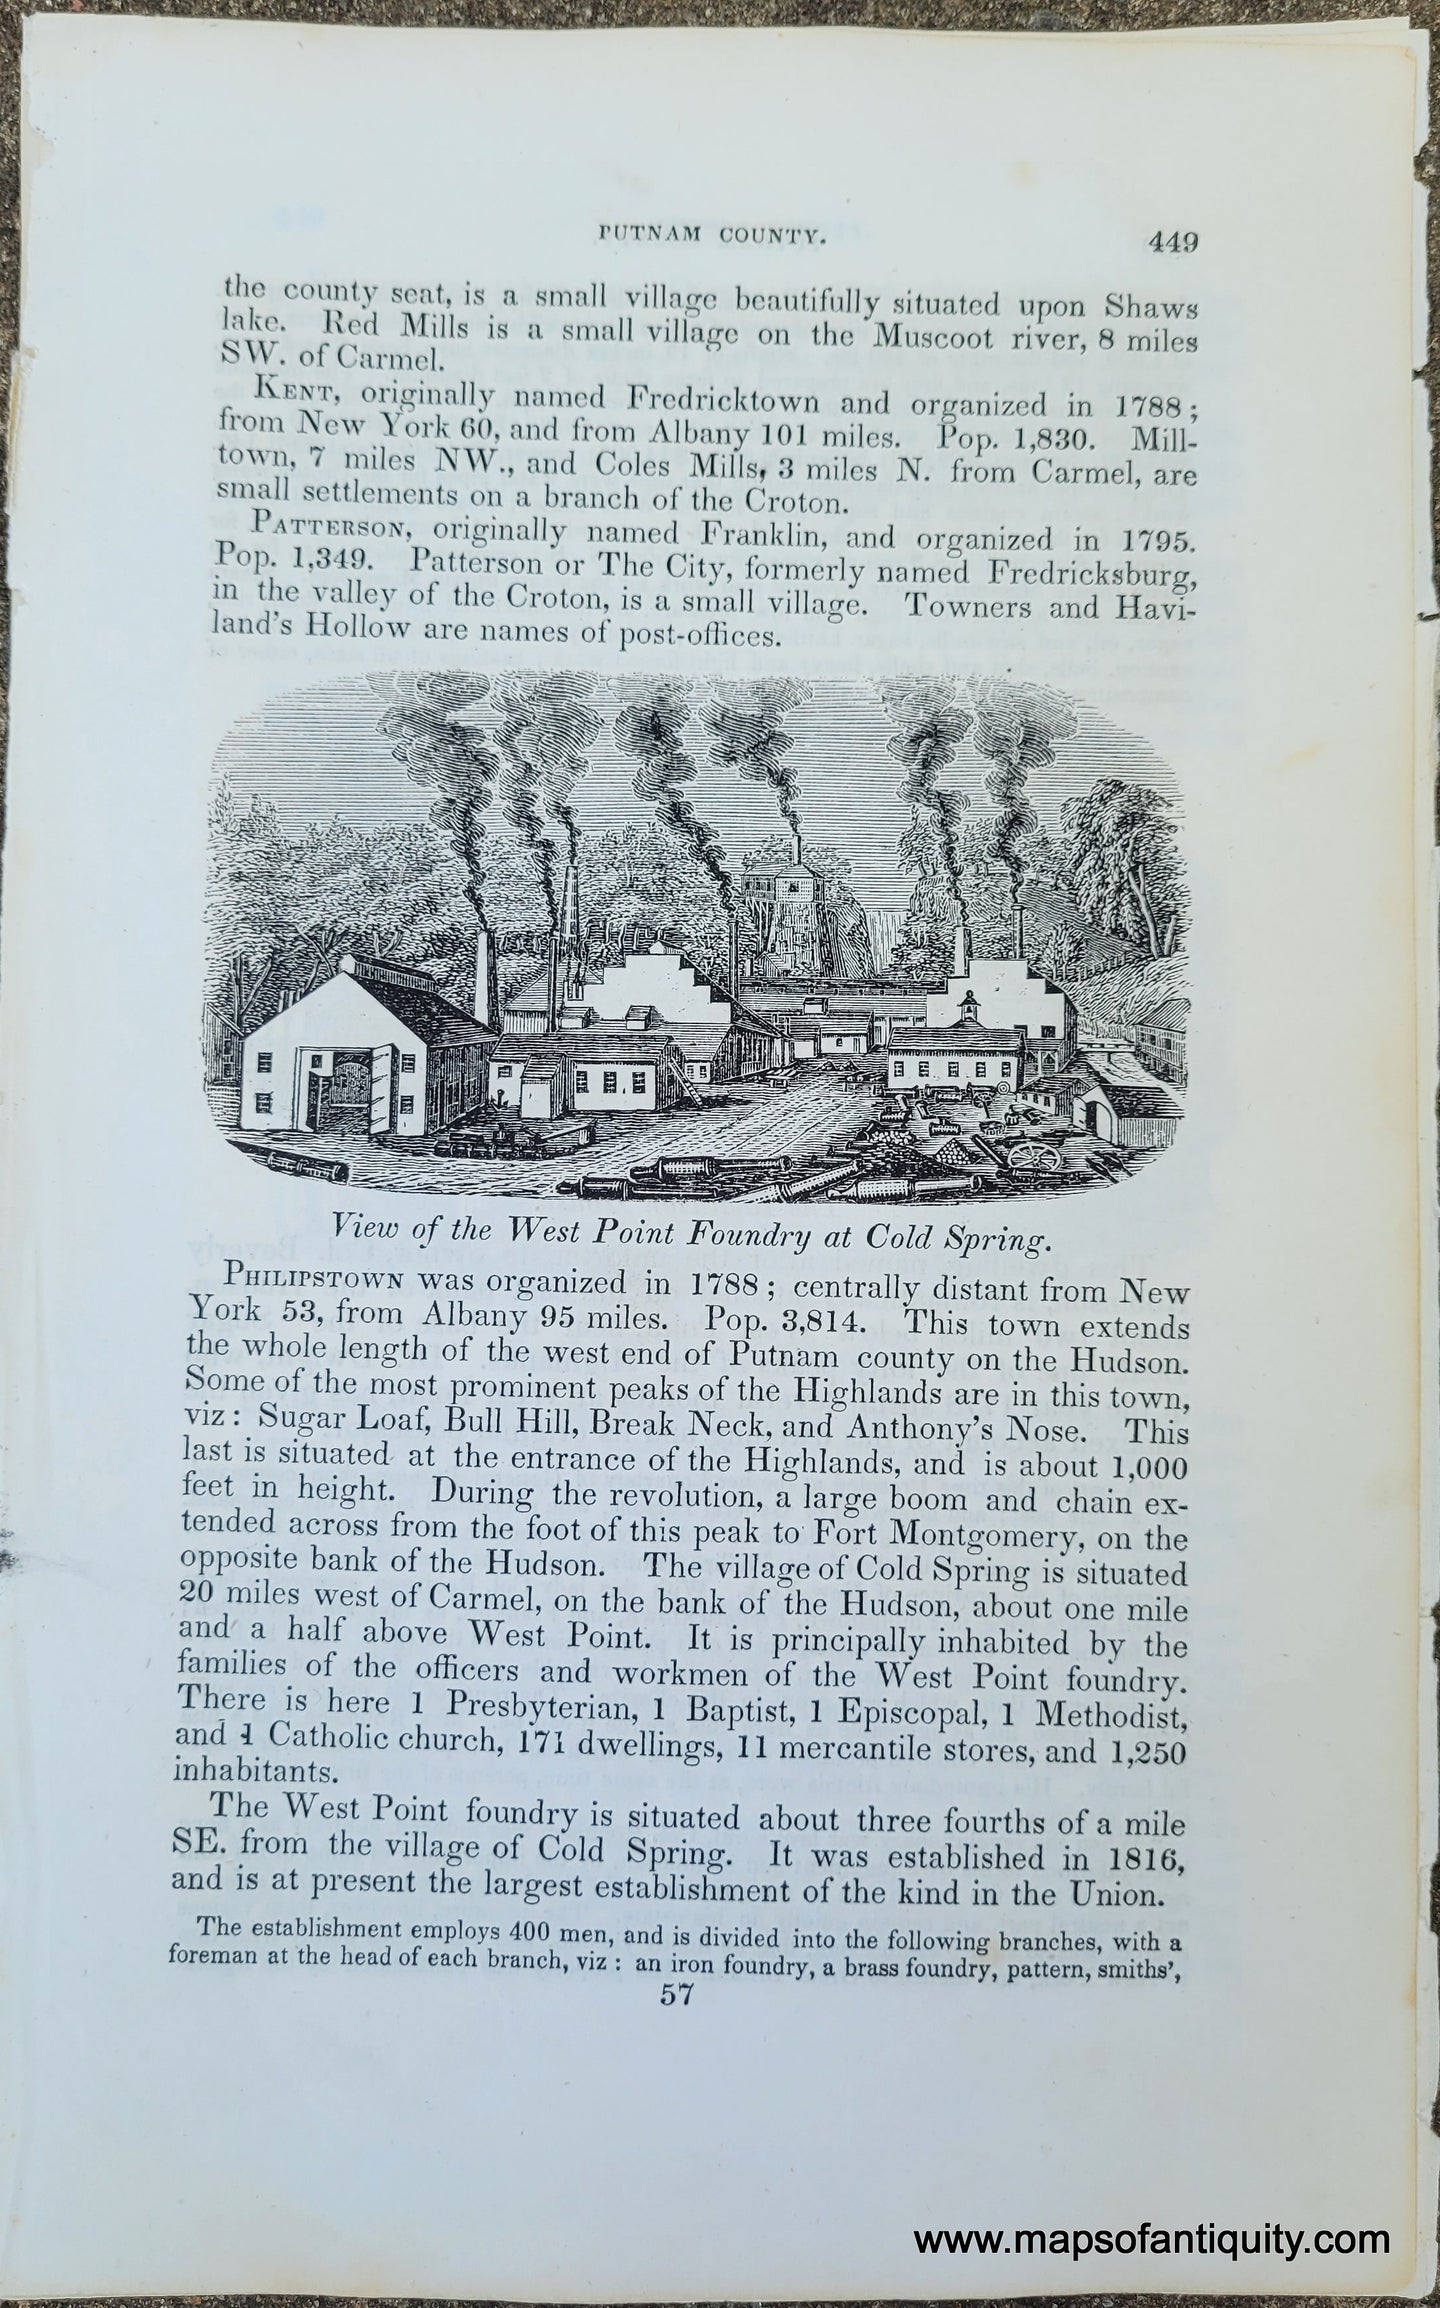 Genuine-Antique-Illustration-View-of-the-West-Point-Foundry-at-Cold-Spring-(NY)-1841-Barber-Maps-Of-Antiquity